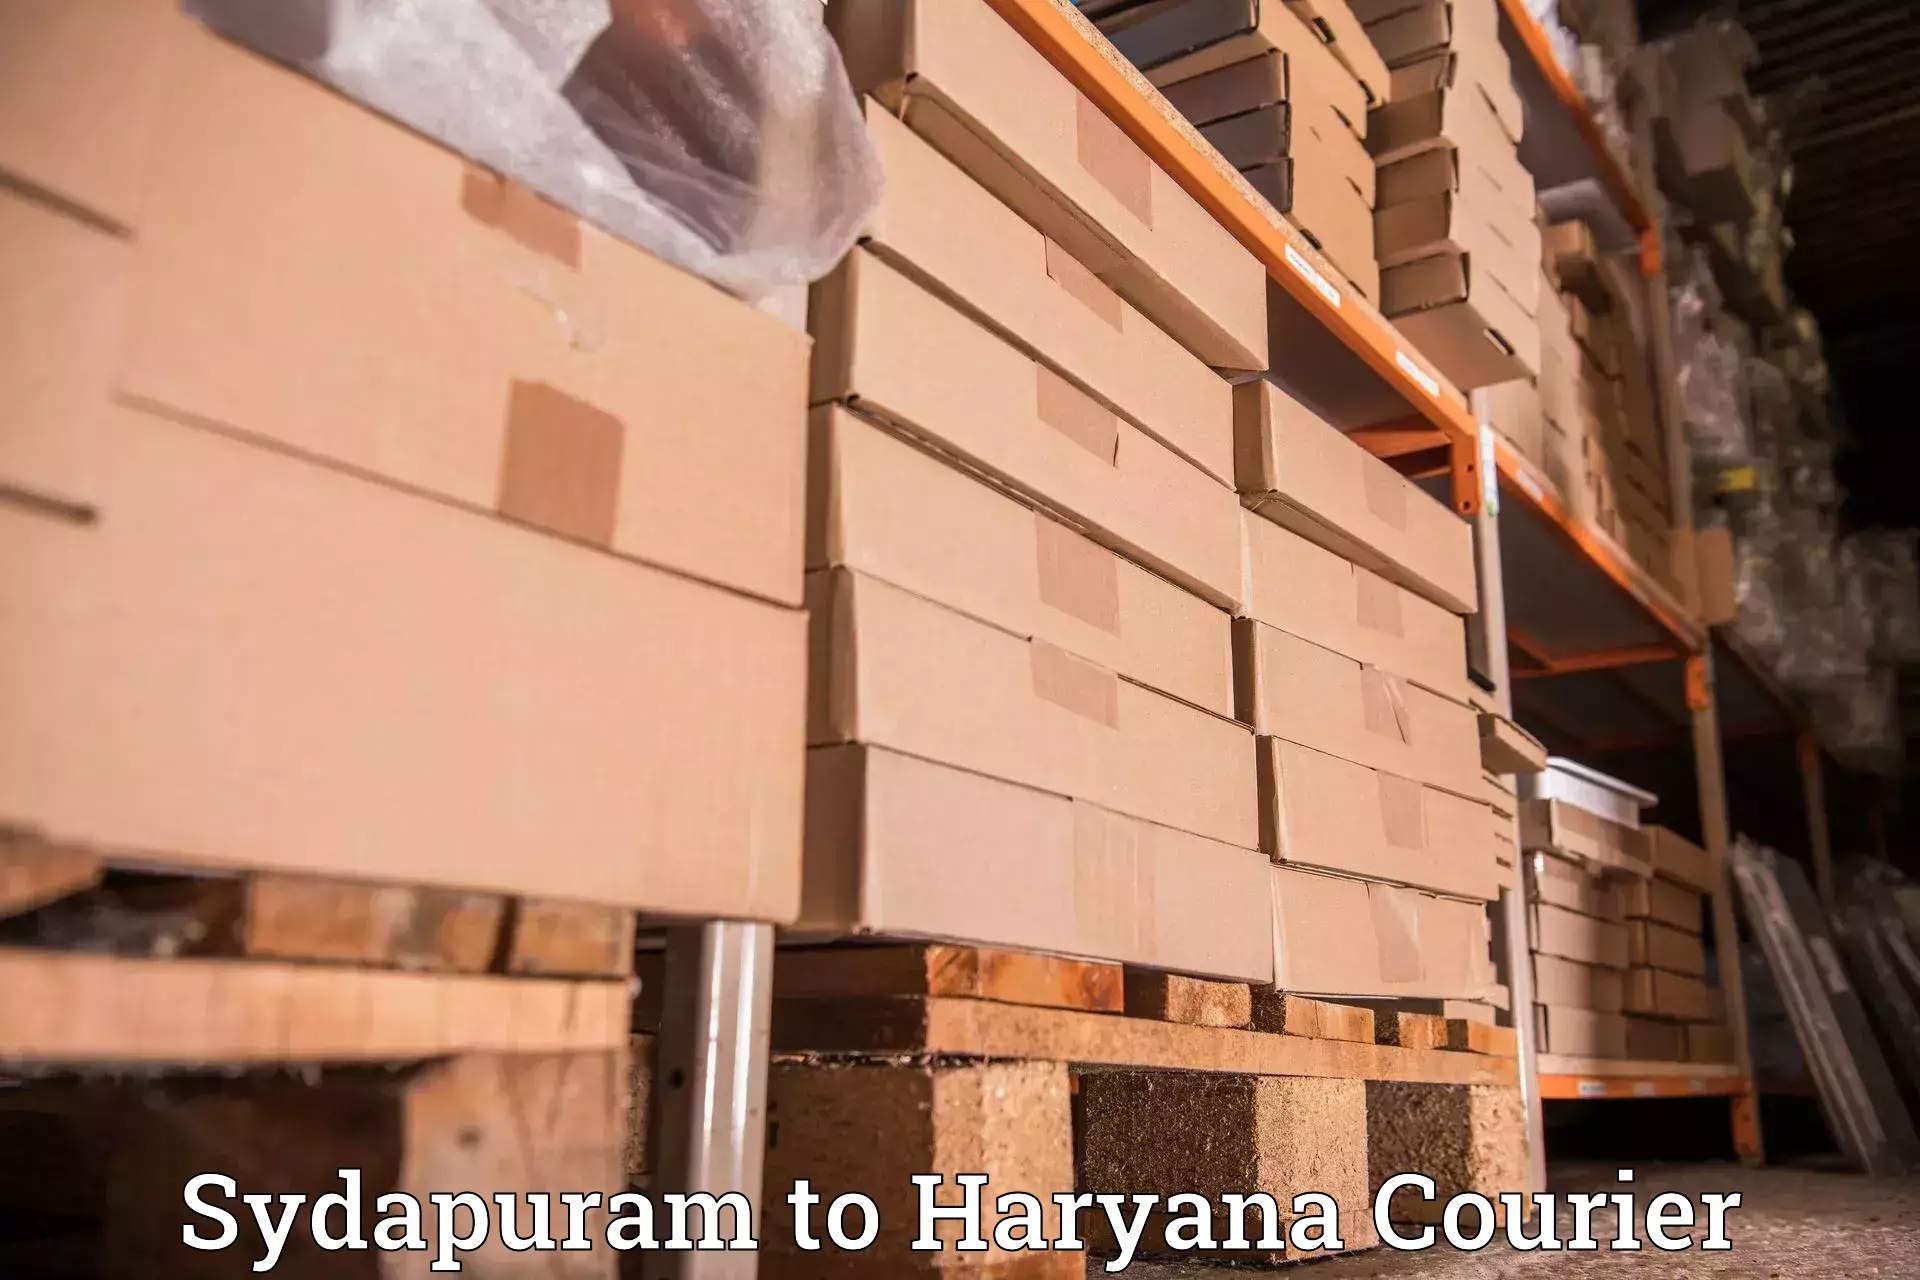 Courier services in Sydapuram to Nuh